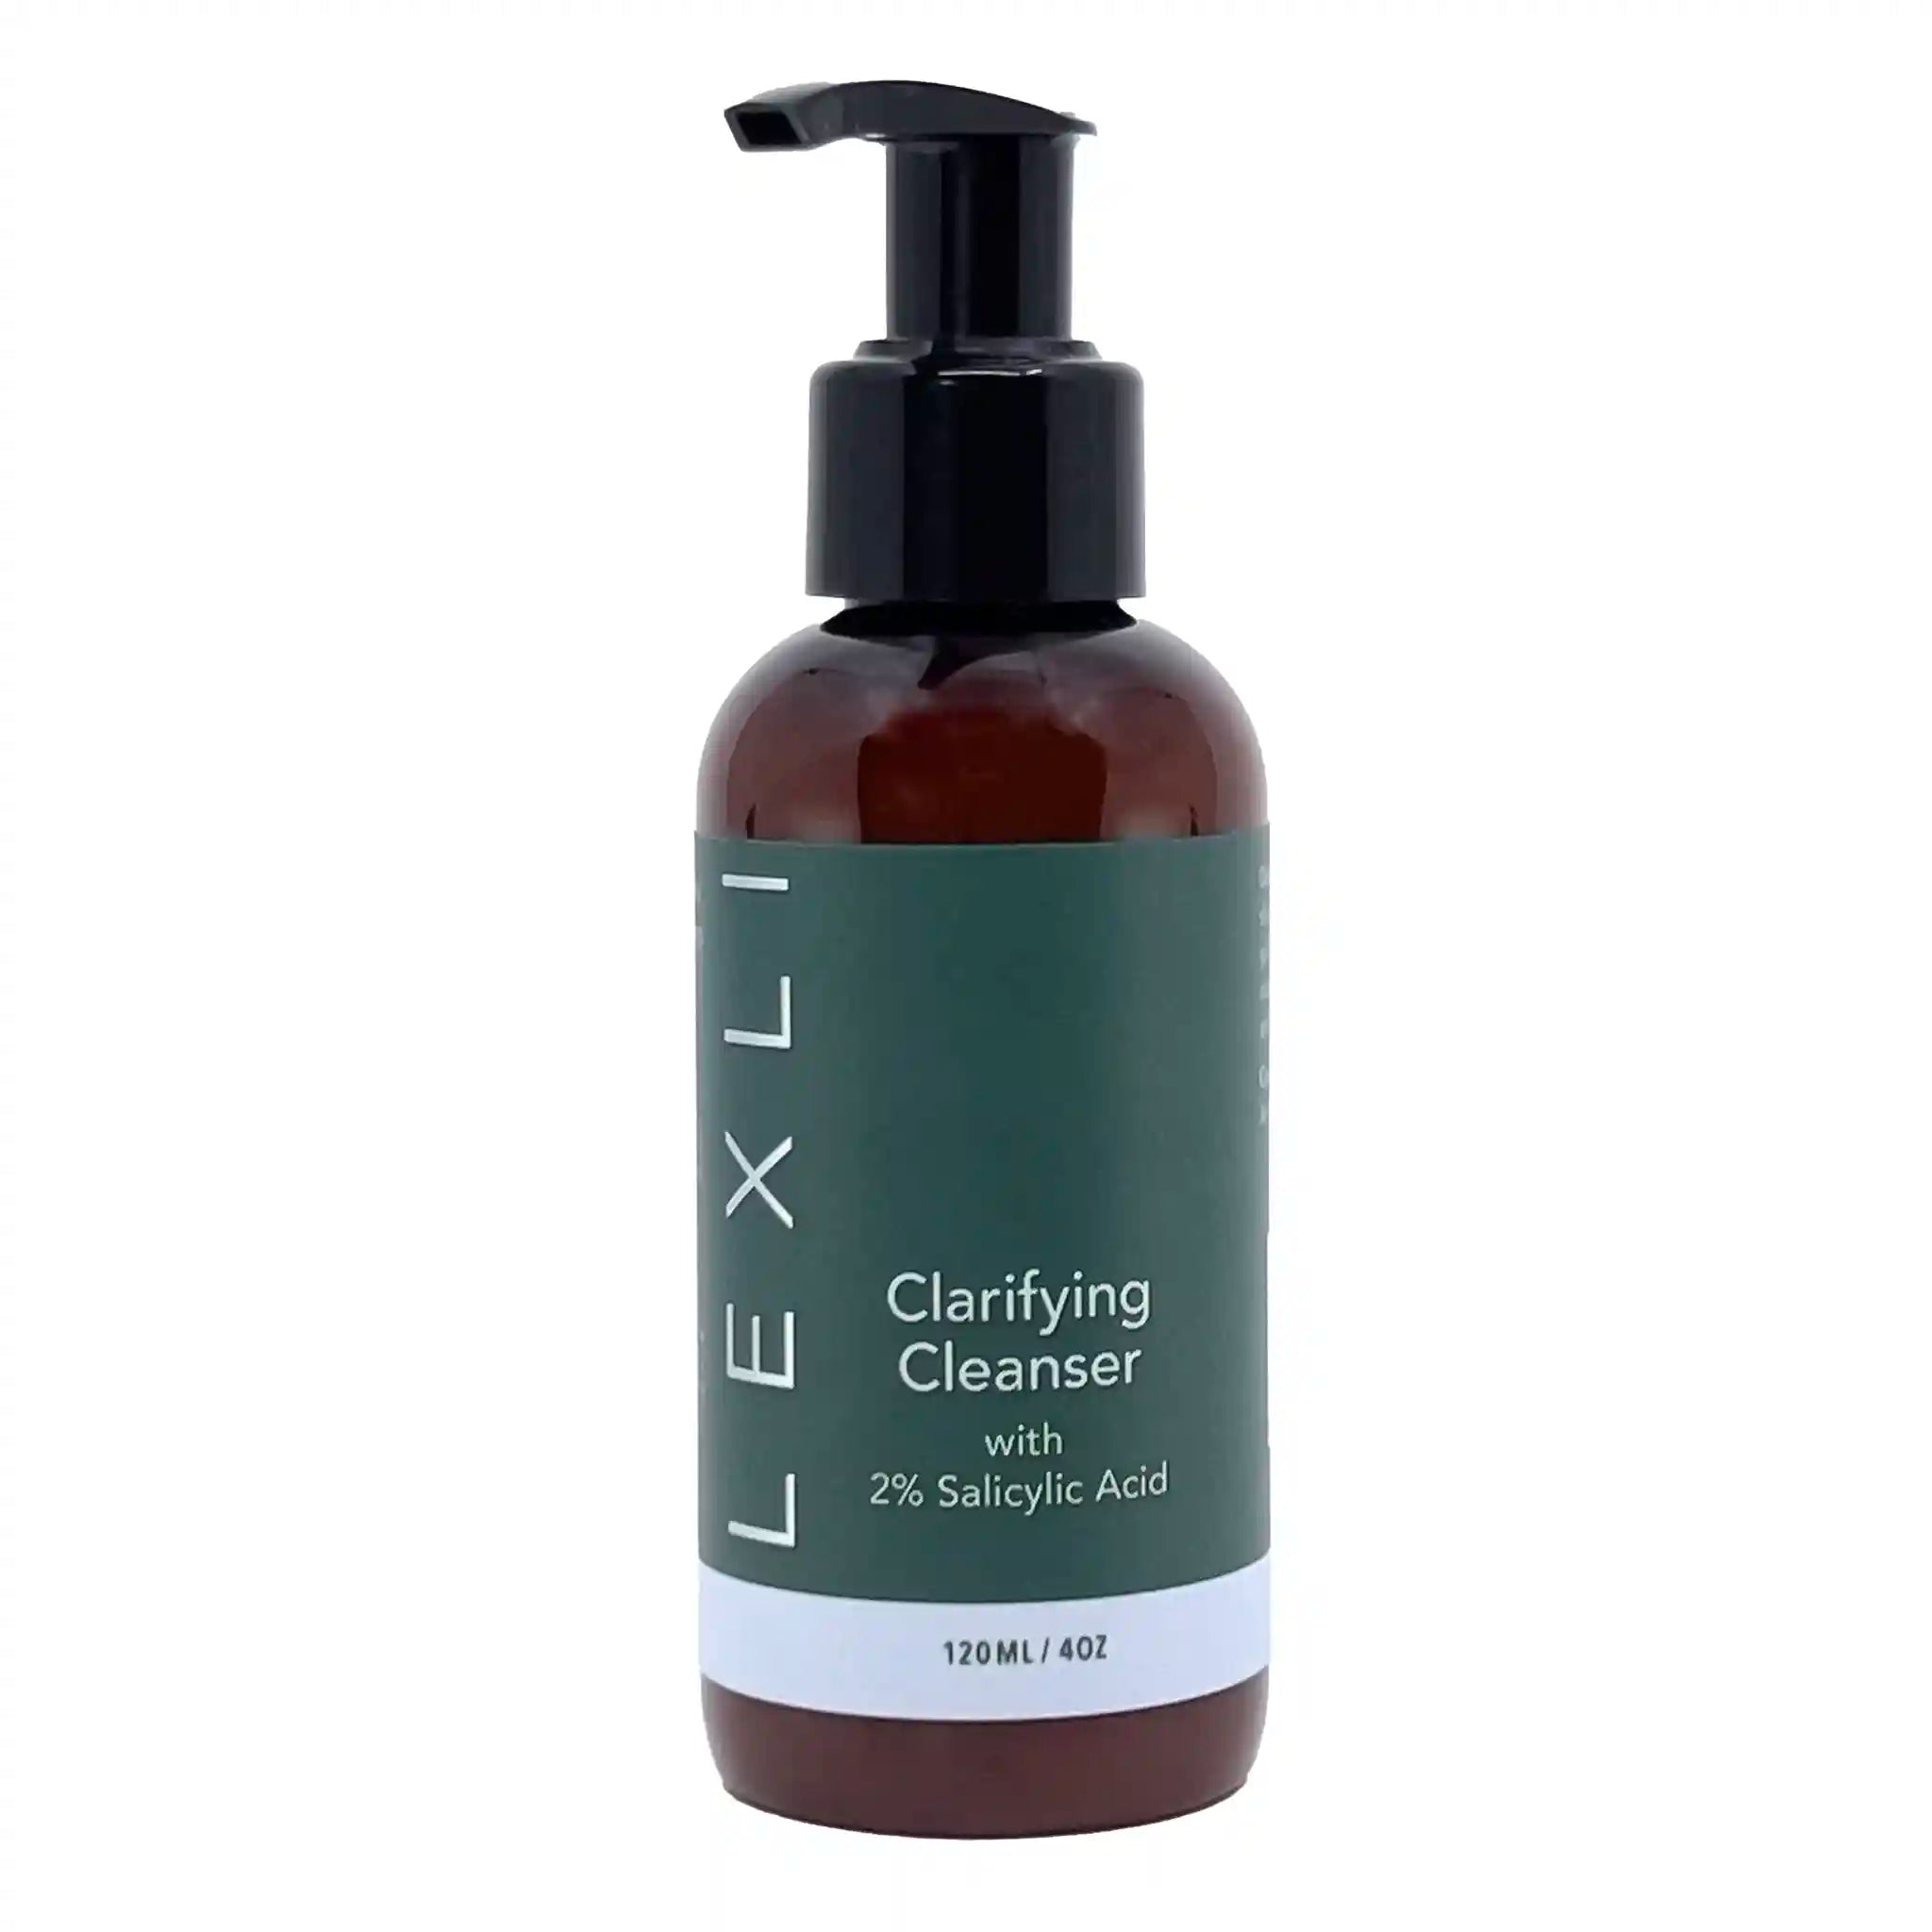 4 oz bottle with green label, Clarifying Cleanser